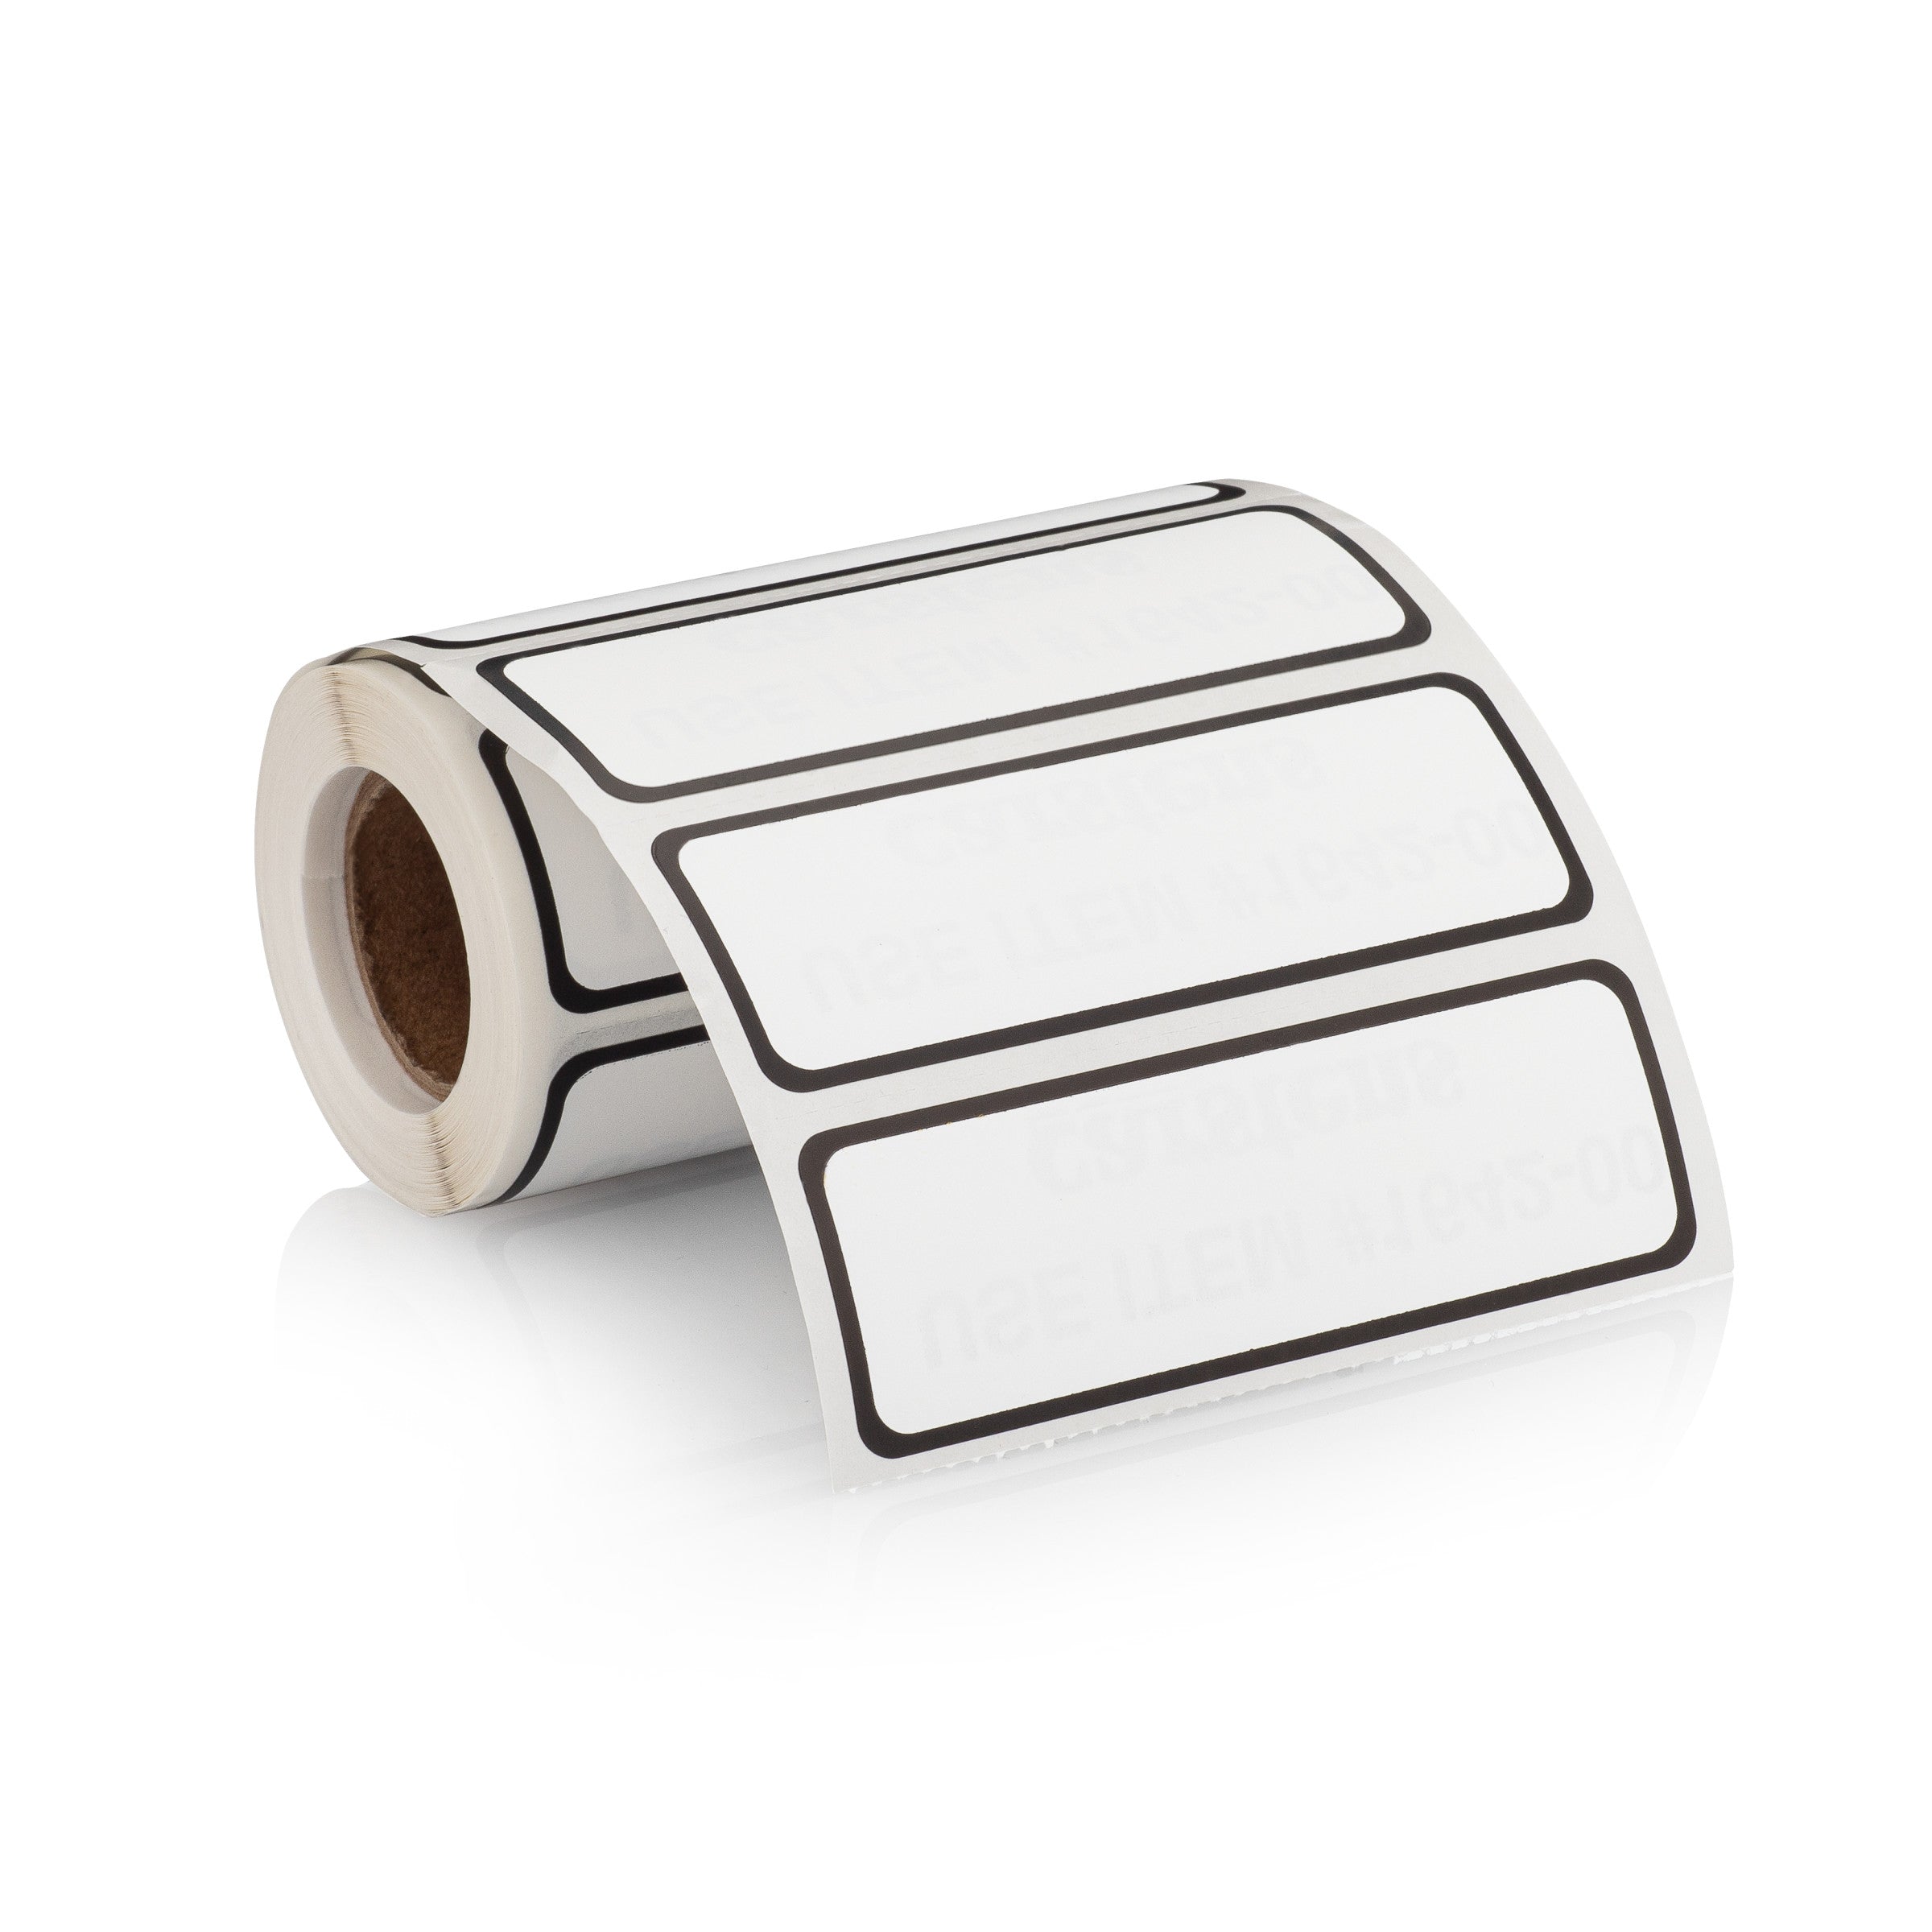 Blank White Alert and Instruction Label, W3" x H1" (Roll of 120)